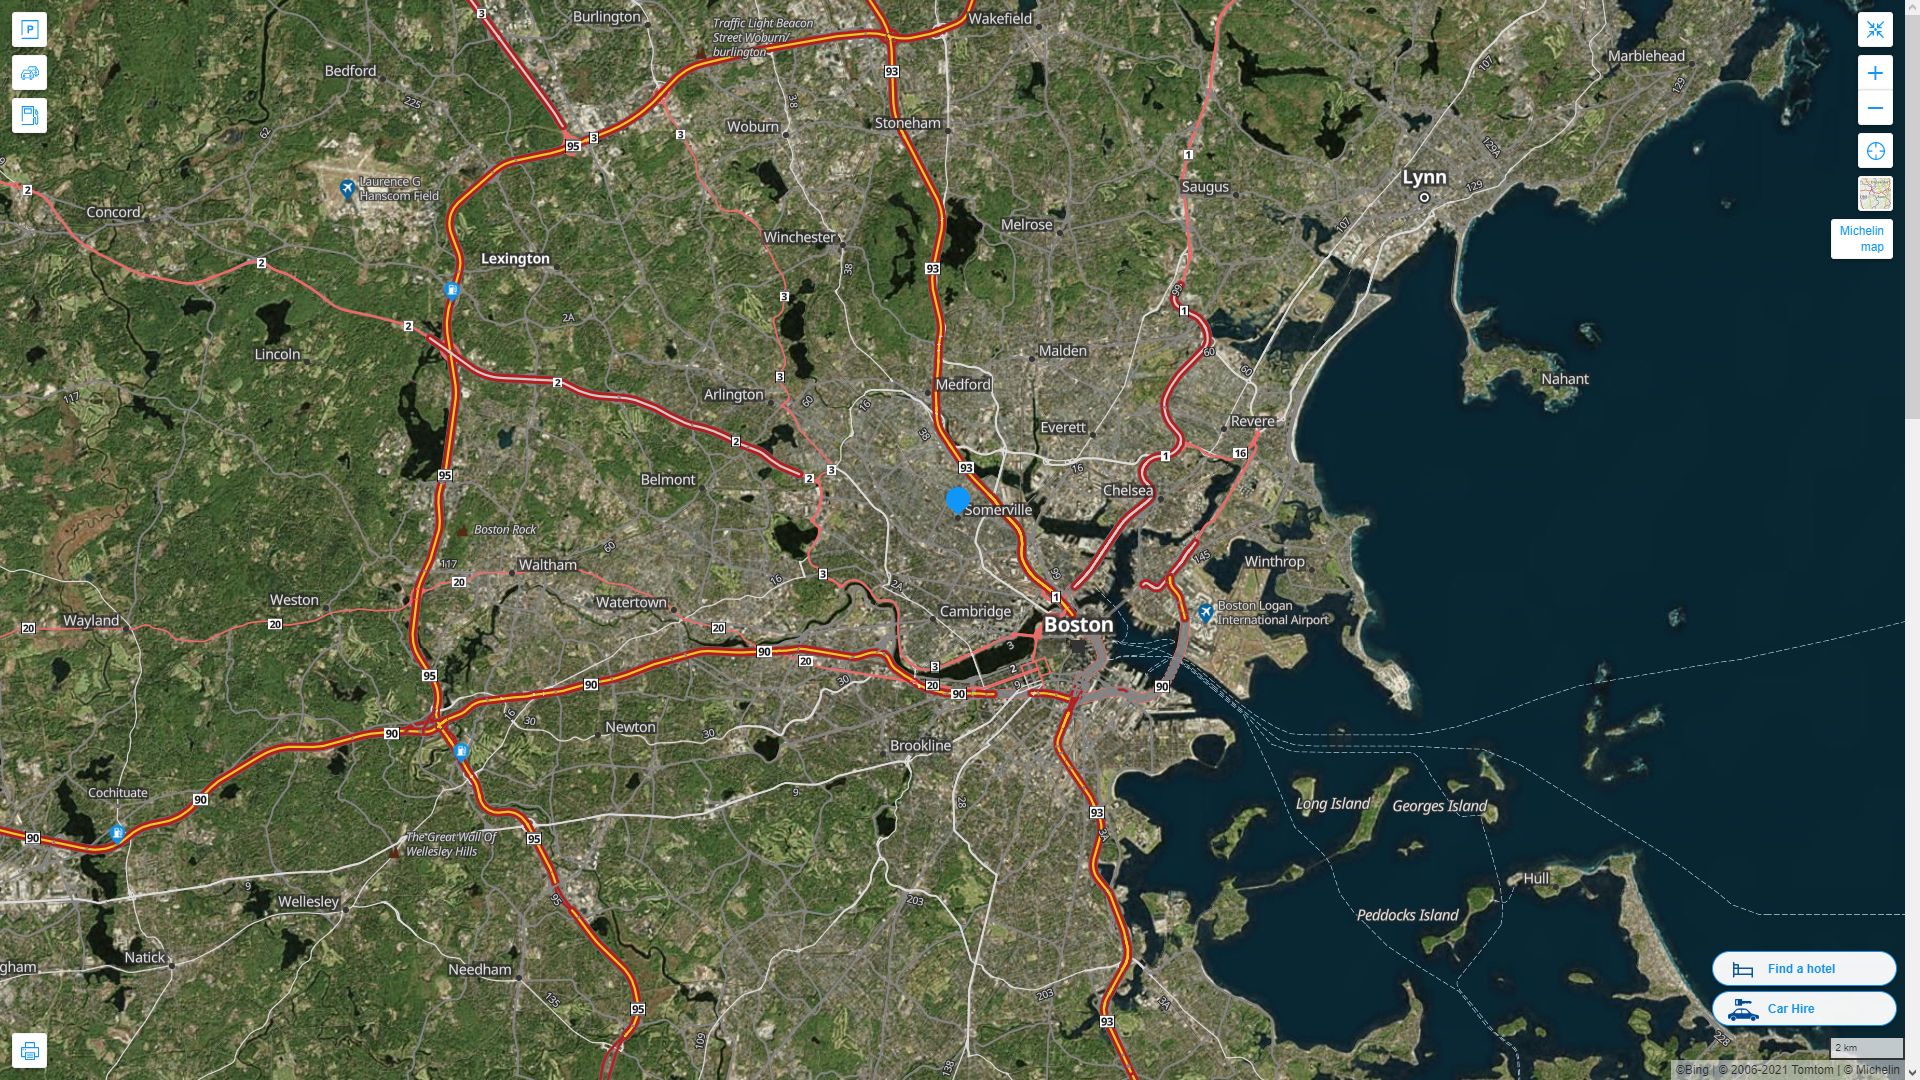 Somerville Massachusetts Highway and Road Map with Satellite View